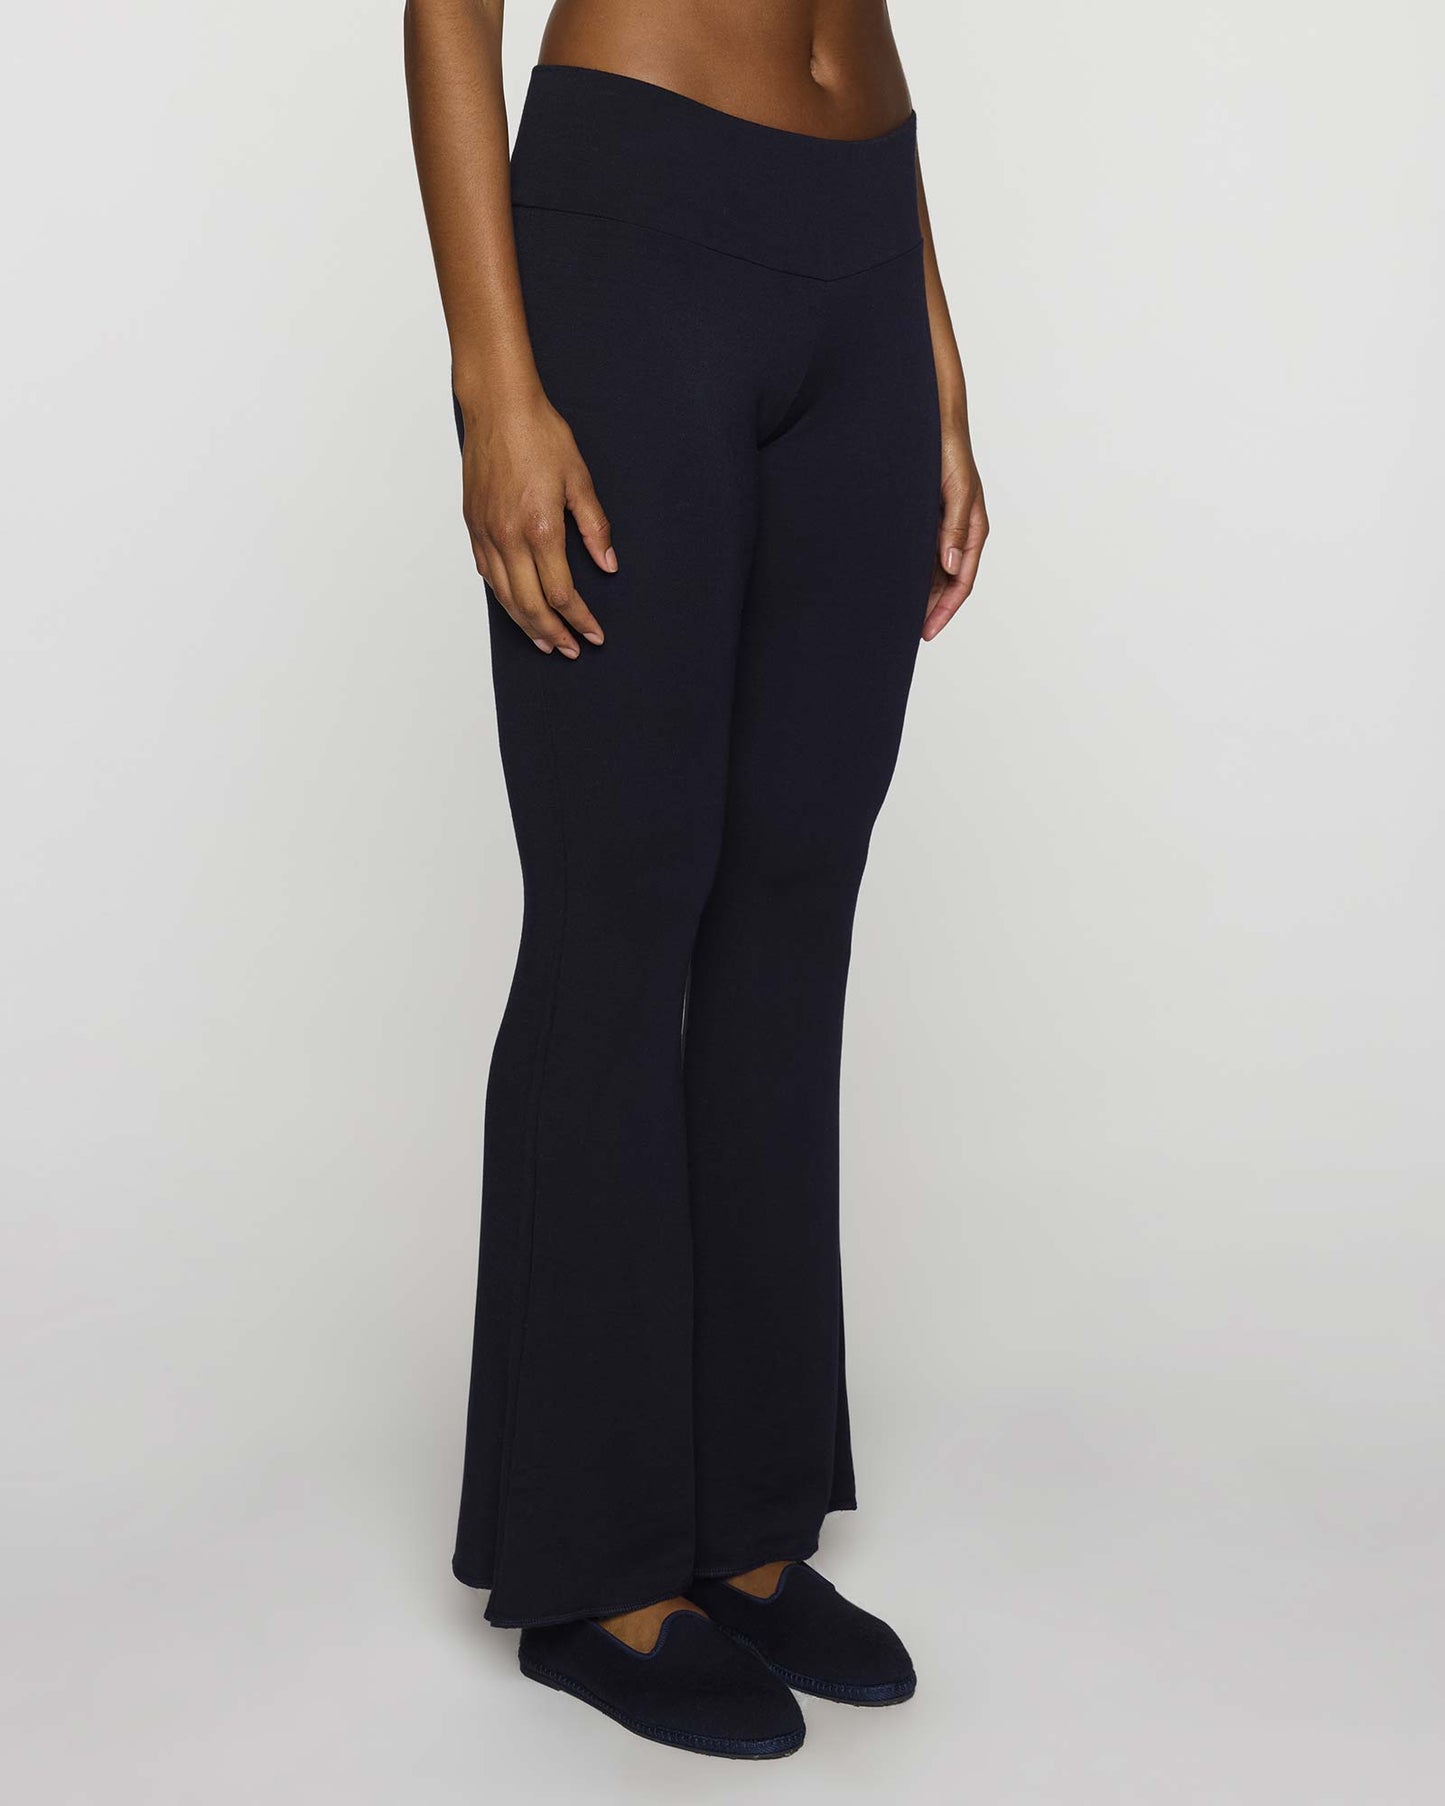 Barely There Zella Barely Flare Live in High Waist Pants